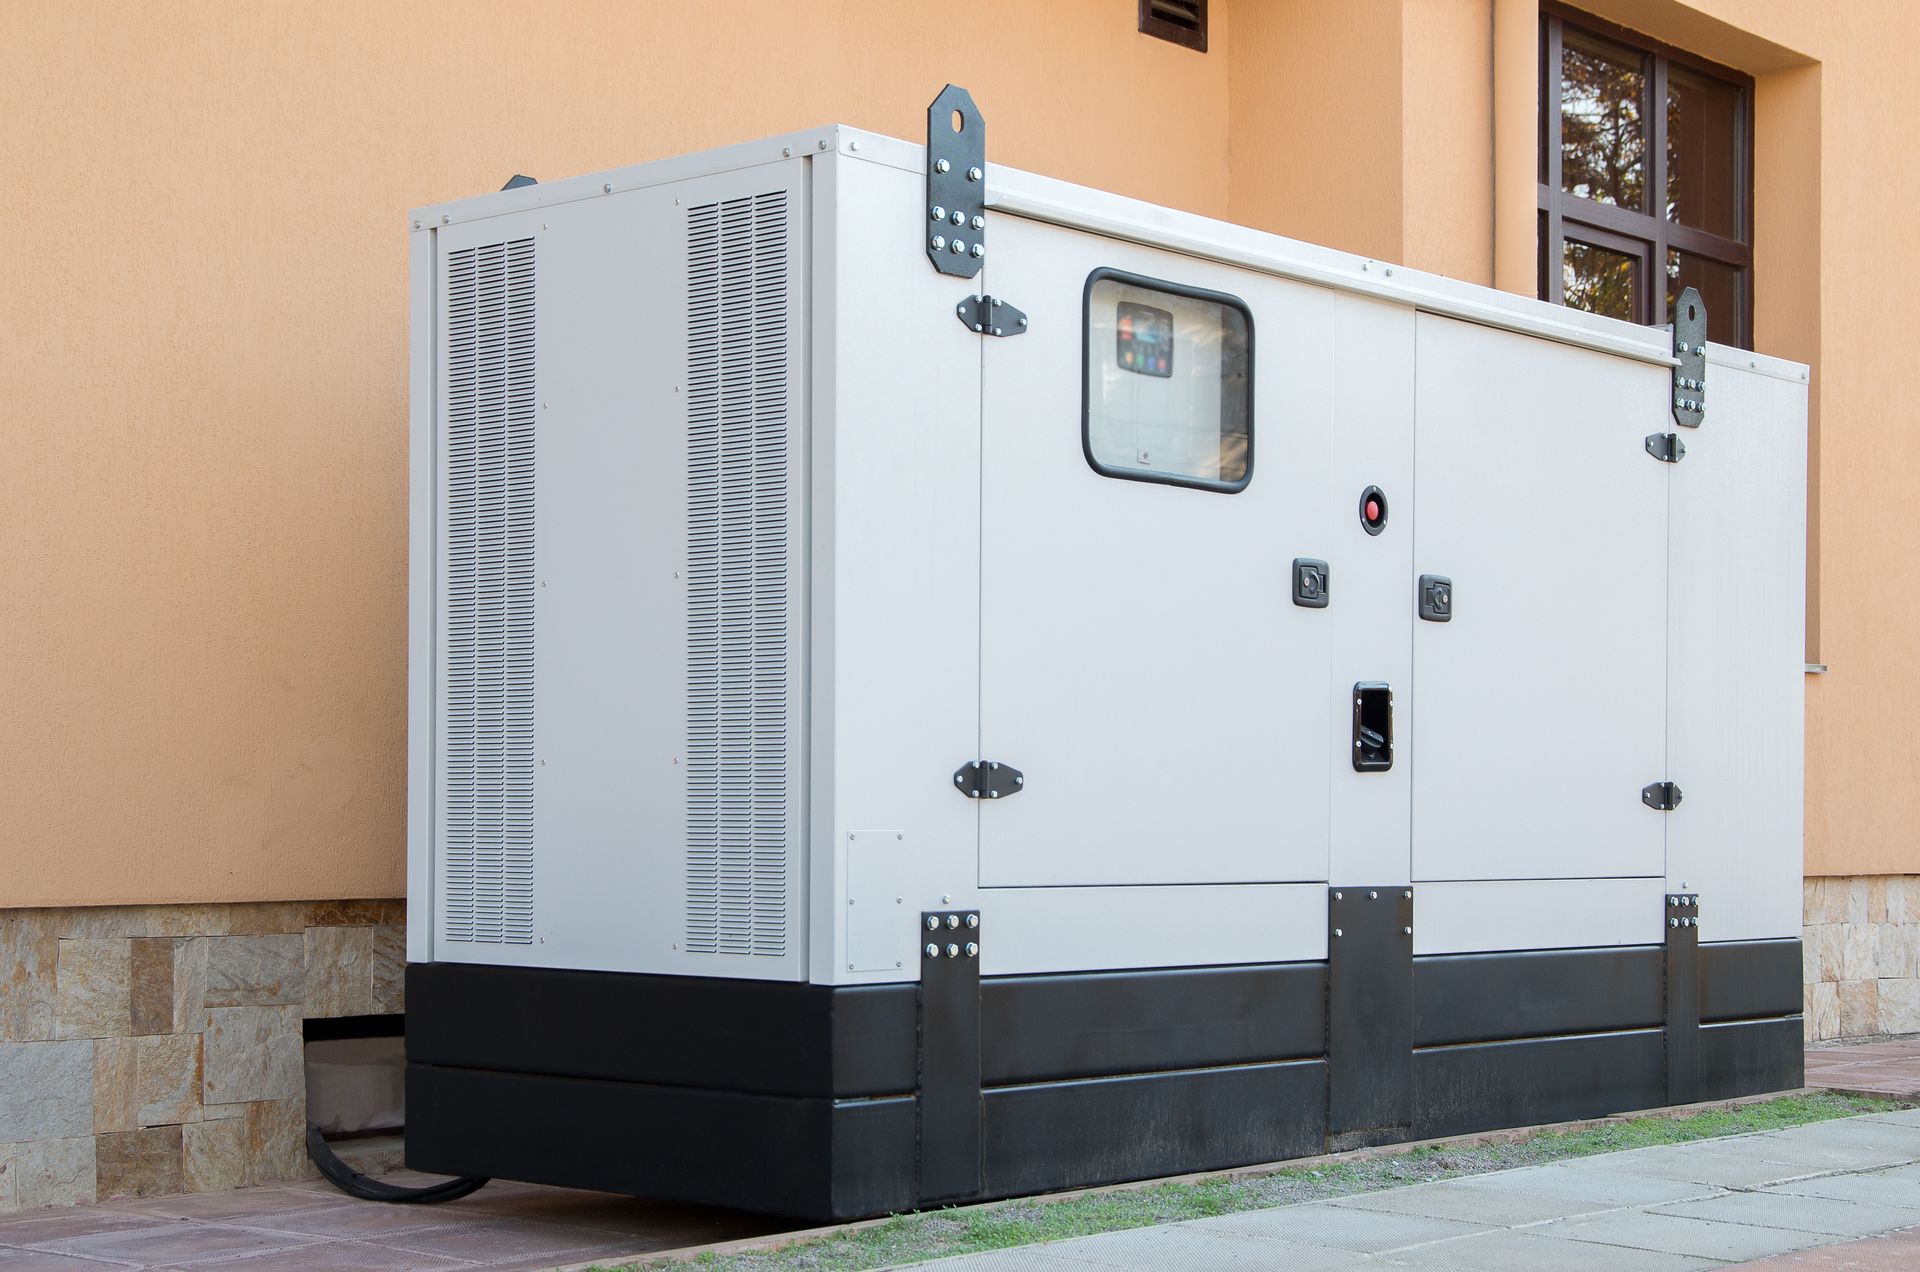 Generator for emergency electric power, providing backup electricity in times of need.